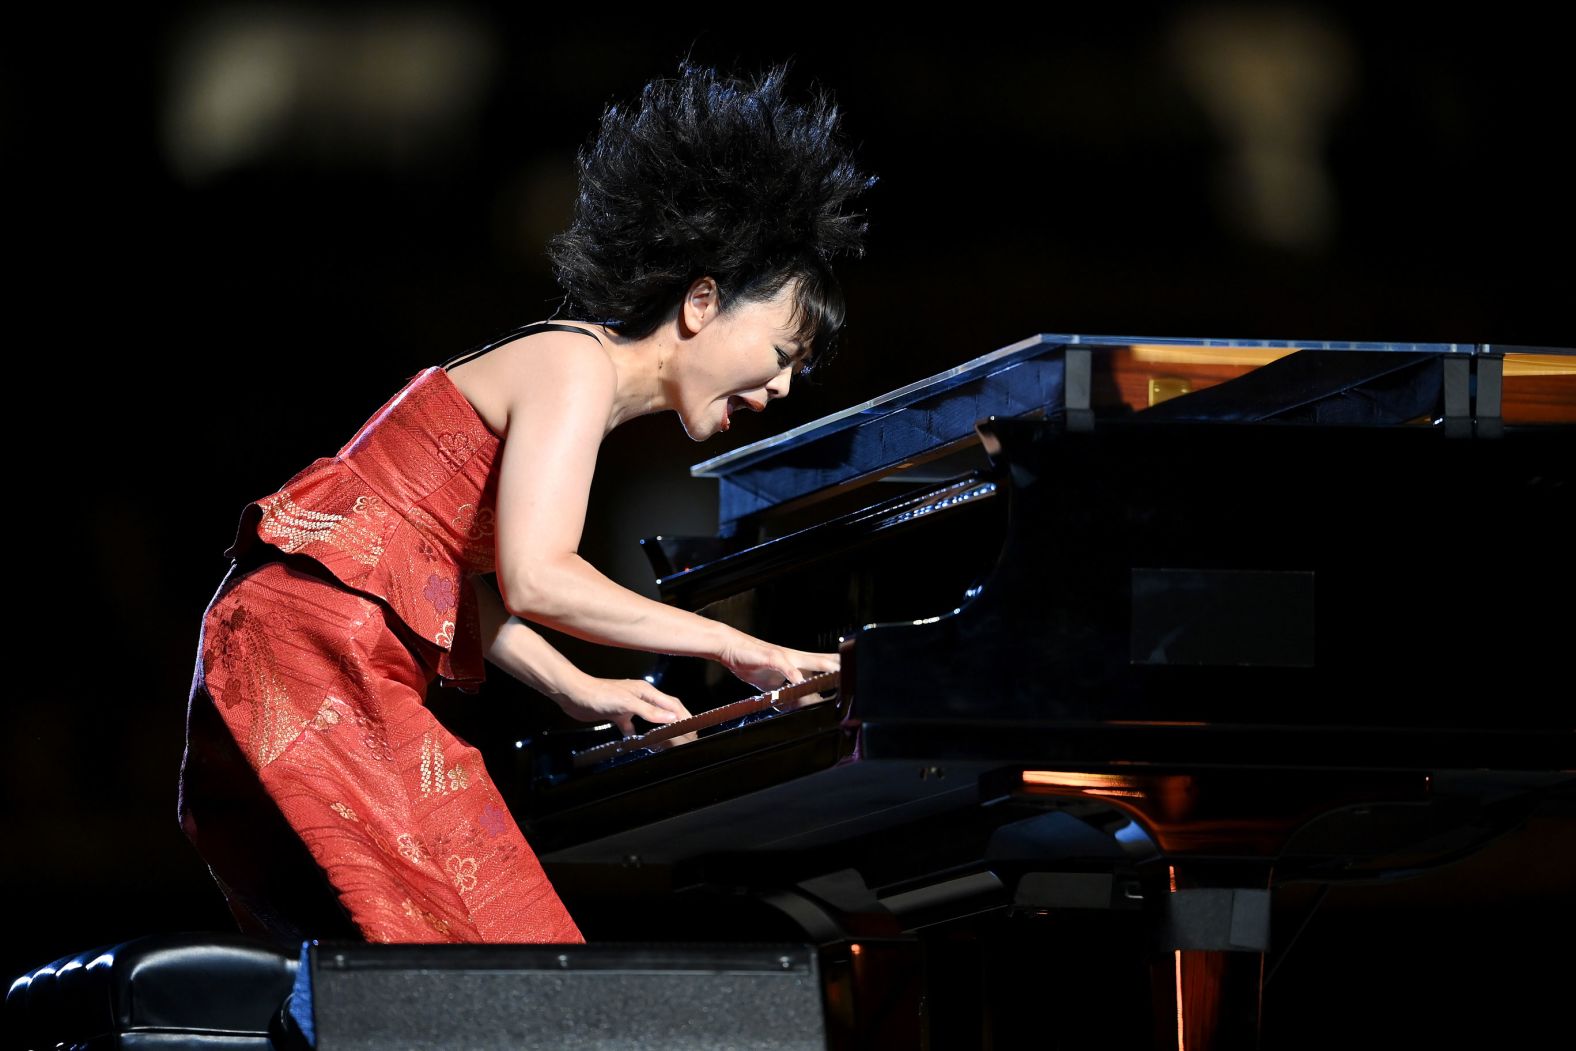 Japanese jazz composer Hiromi Uehara plays the piano during the opening ceremony.